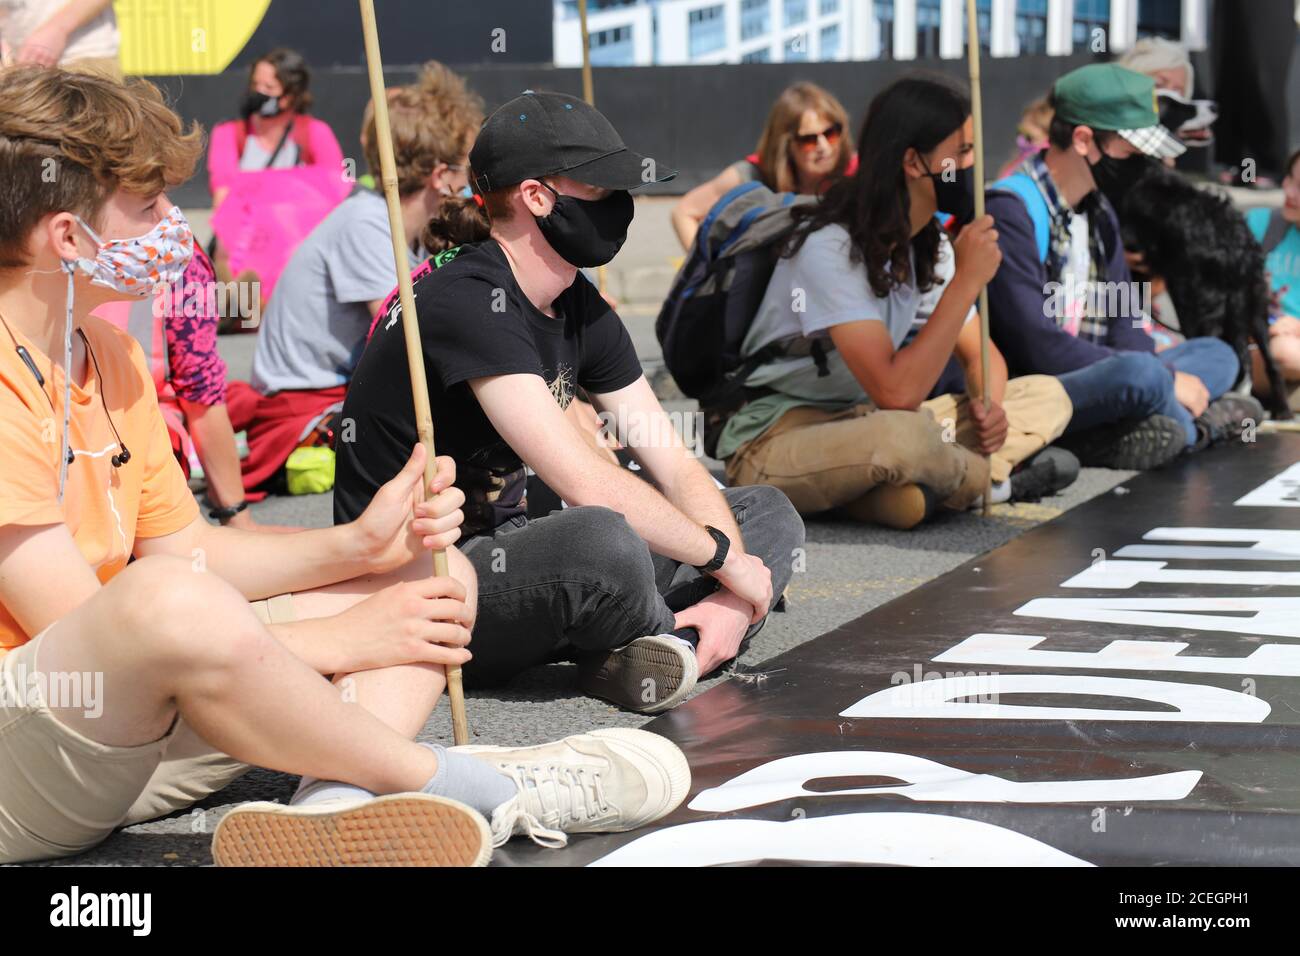 Cardiff, Wales, UK. 1st September 2020. Extinction Rebellion protestors take over Cardiff and march on the Senedd to demand a green recovery and passing of the CEE Bill on day one of a week of action. Protestors sit down in the street in central Cardiff blocking traffic Credit: Denise Laura Baker/Alamy Live News Stock Photo